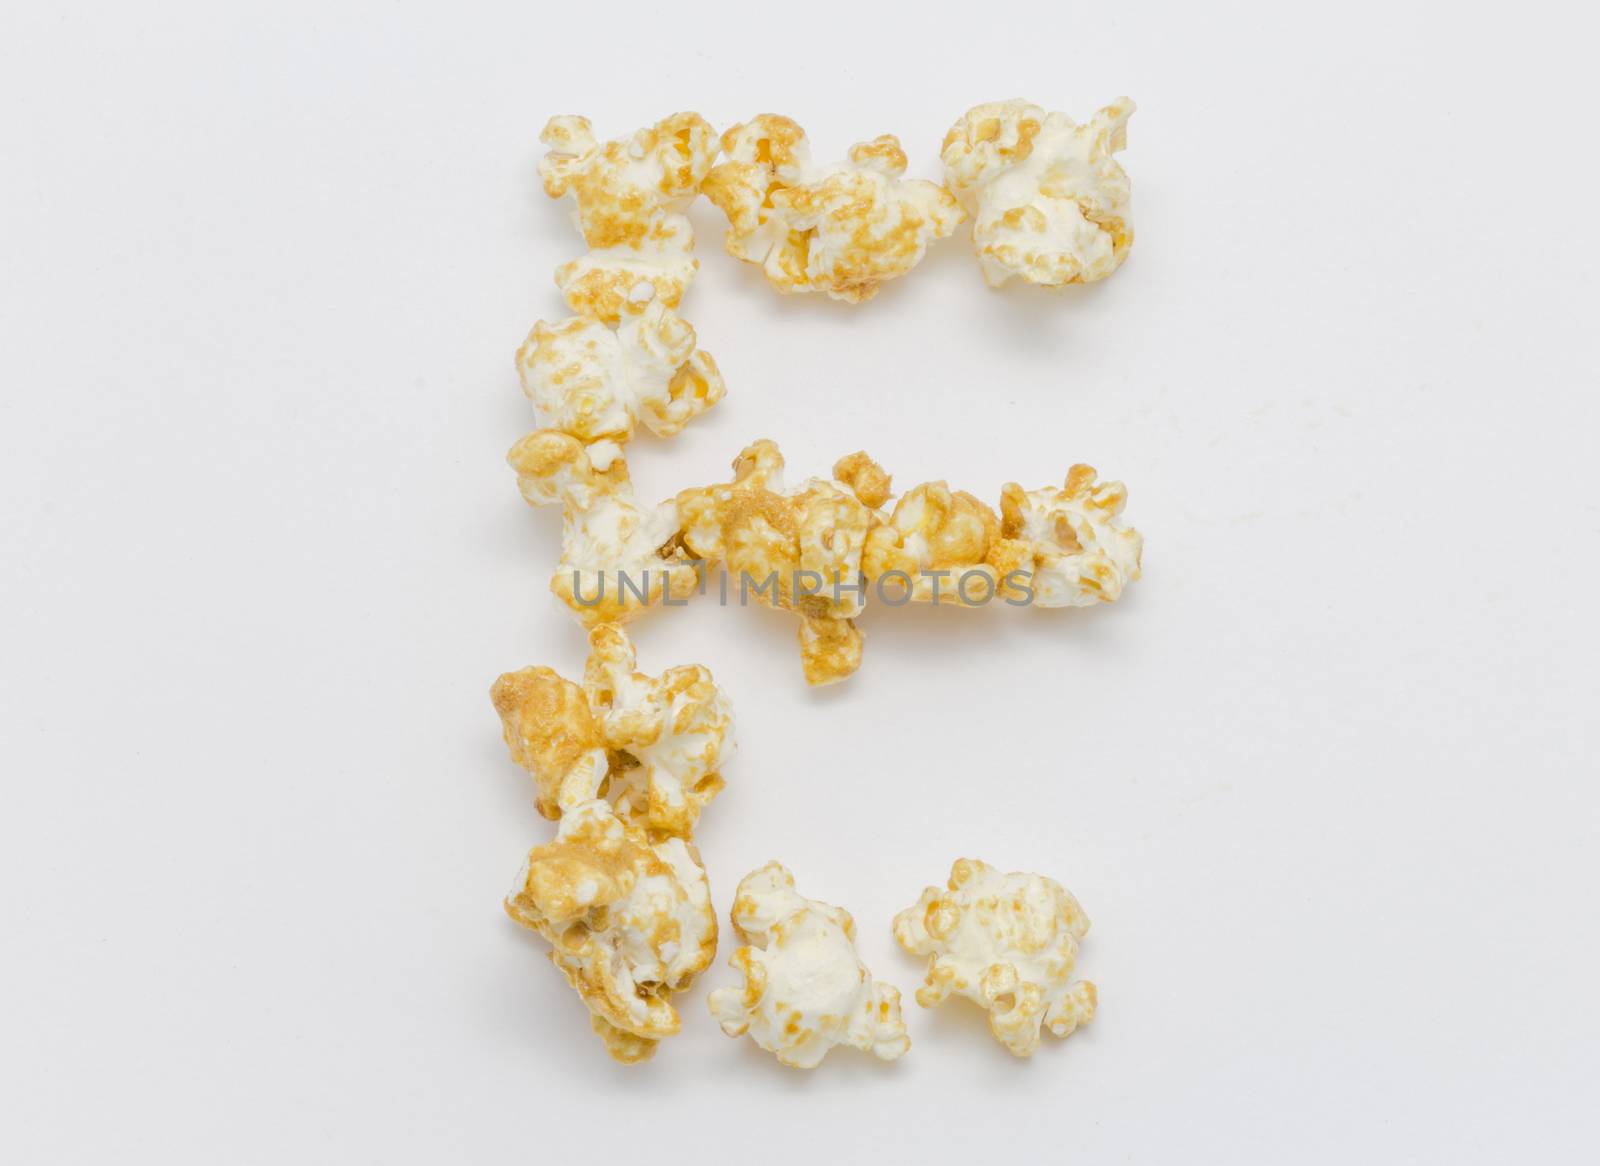 pop corn forming letter E isolated on white background